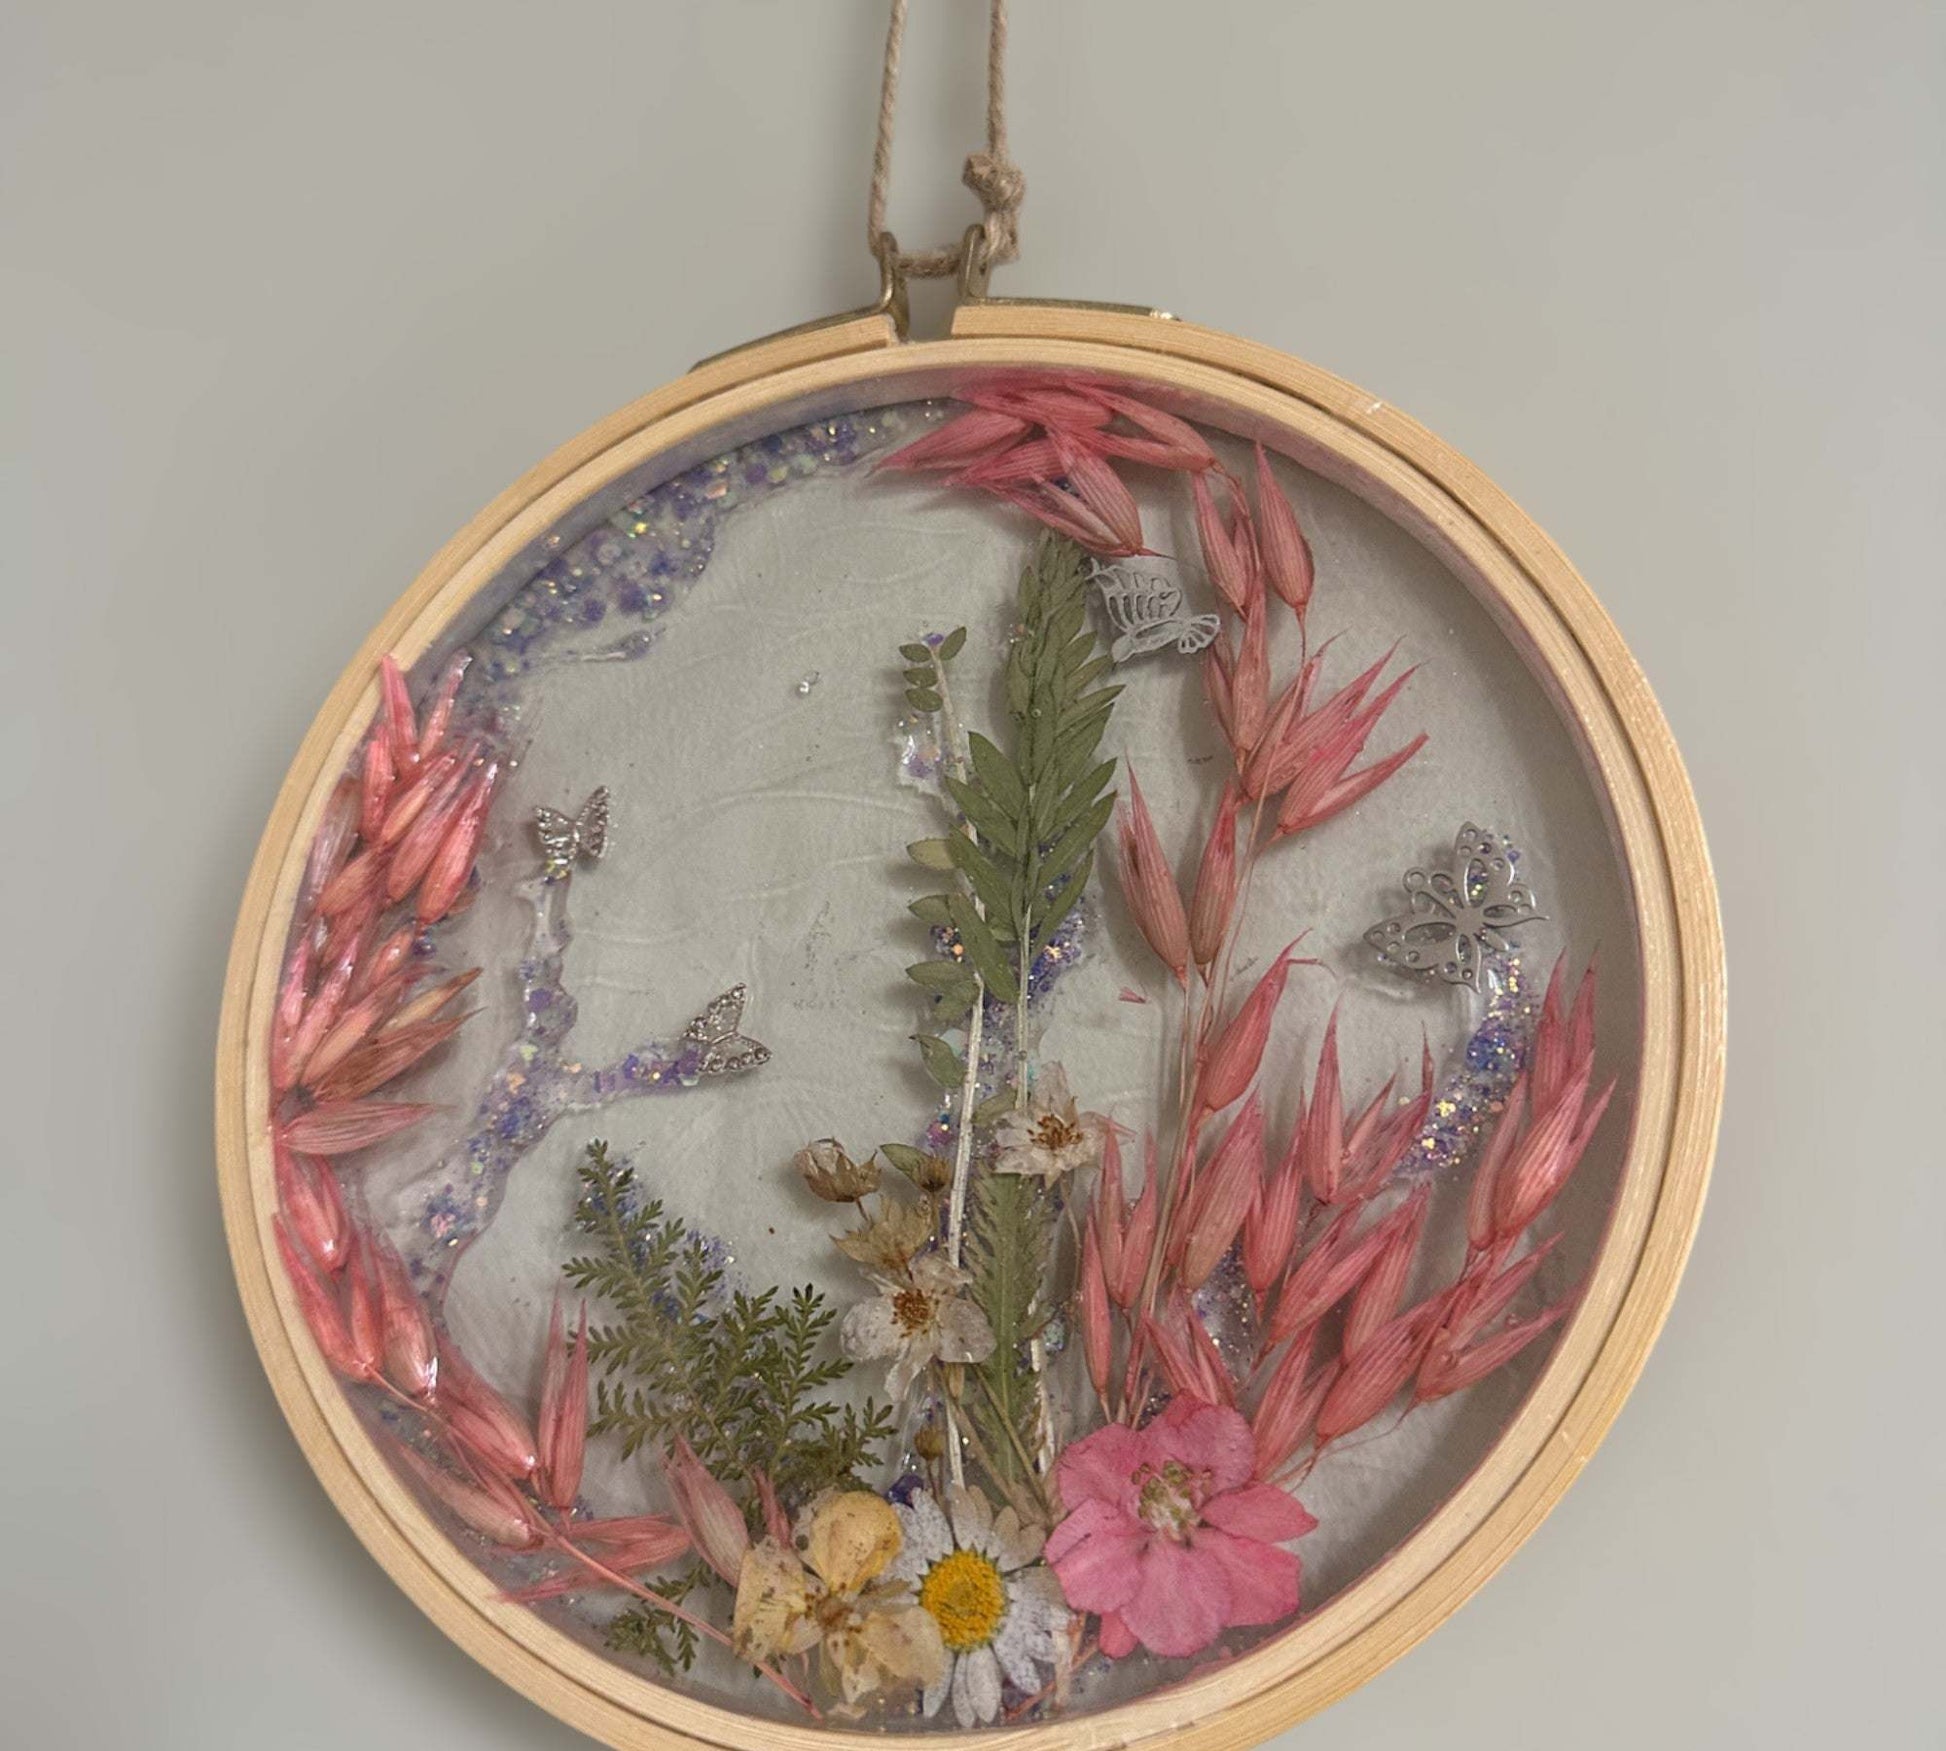 Pretty in Pink Garden Suncatcher - Handmade with Real Dried Flowers